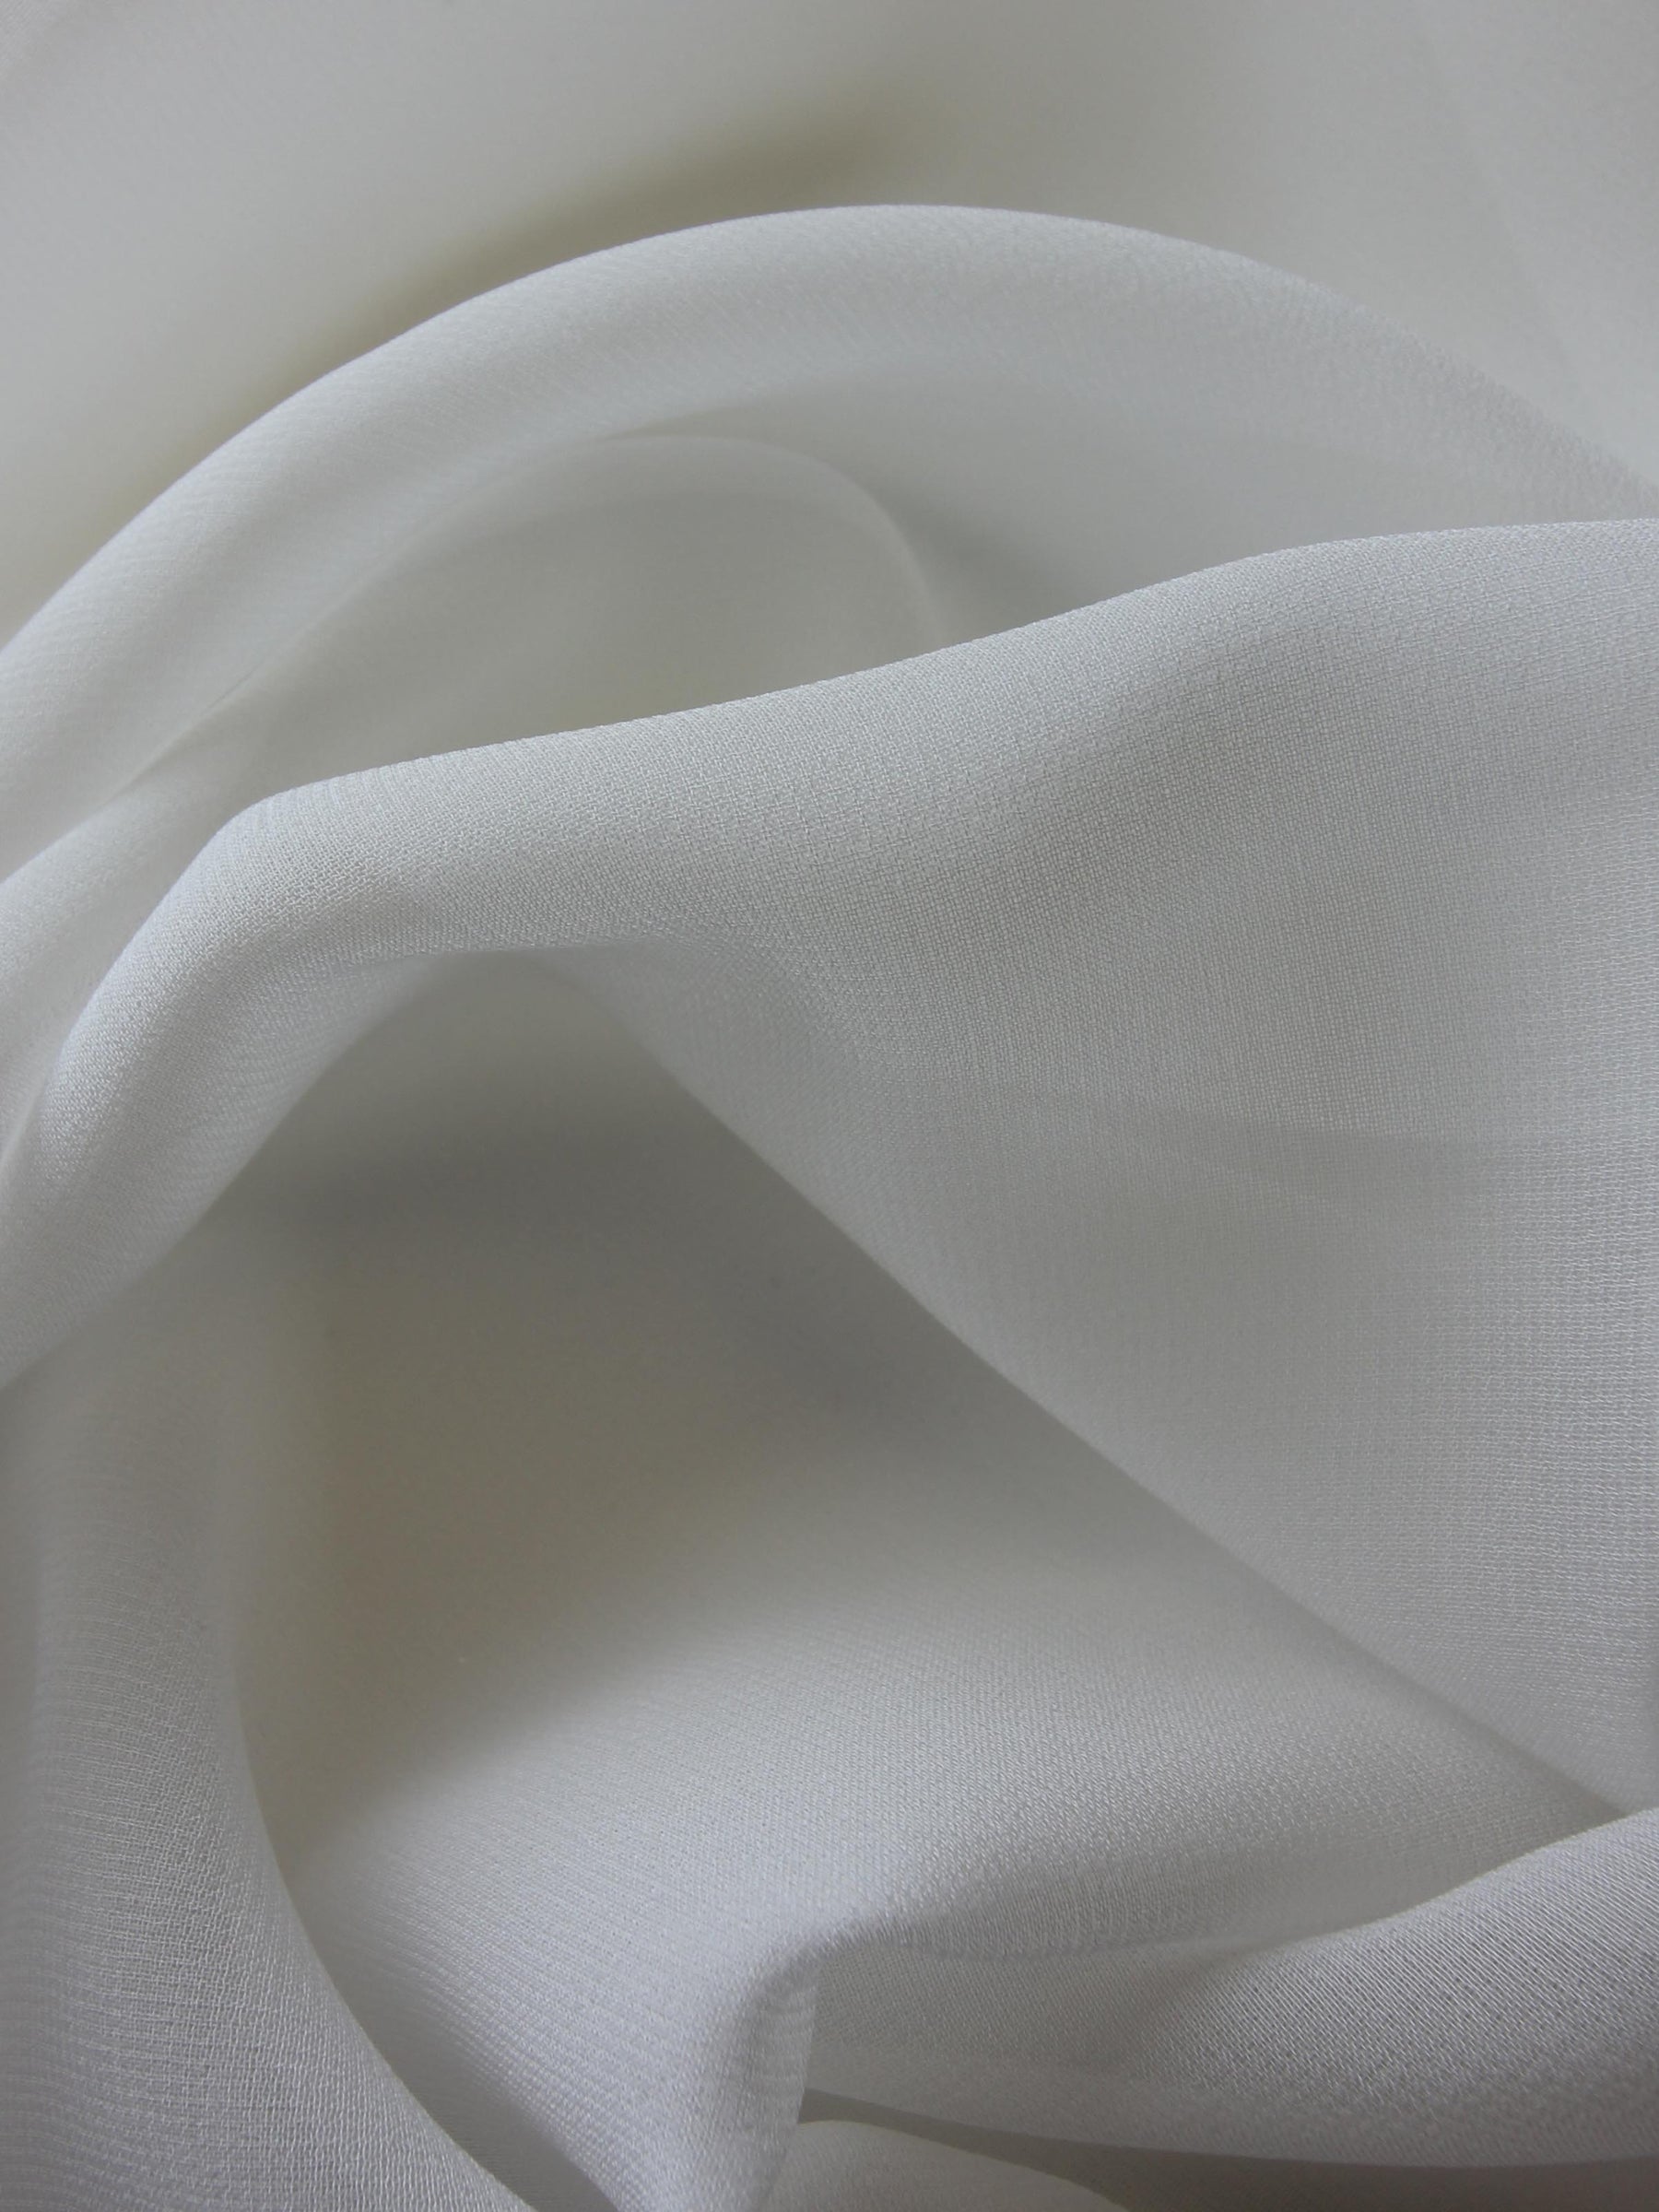 Silk Georgette Chiffon Fabric Solid 100% Silk 10mm 44 Wide Sold BTY Many Colors (White)